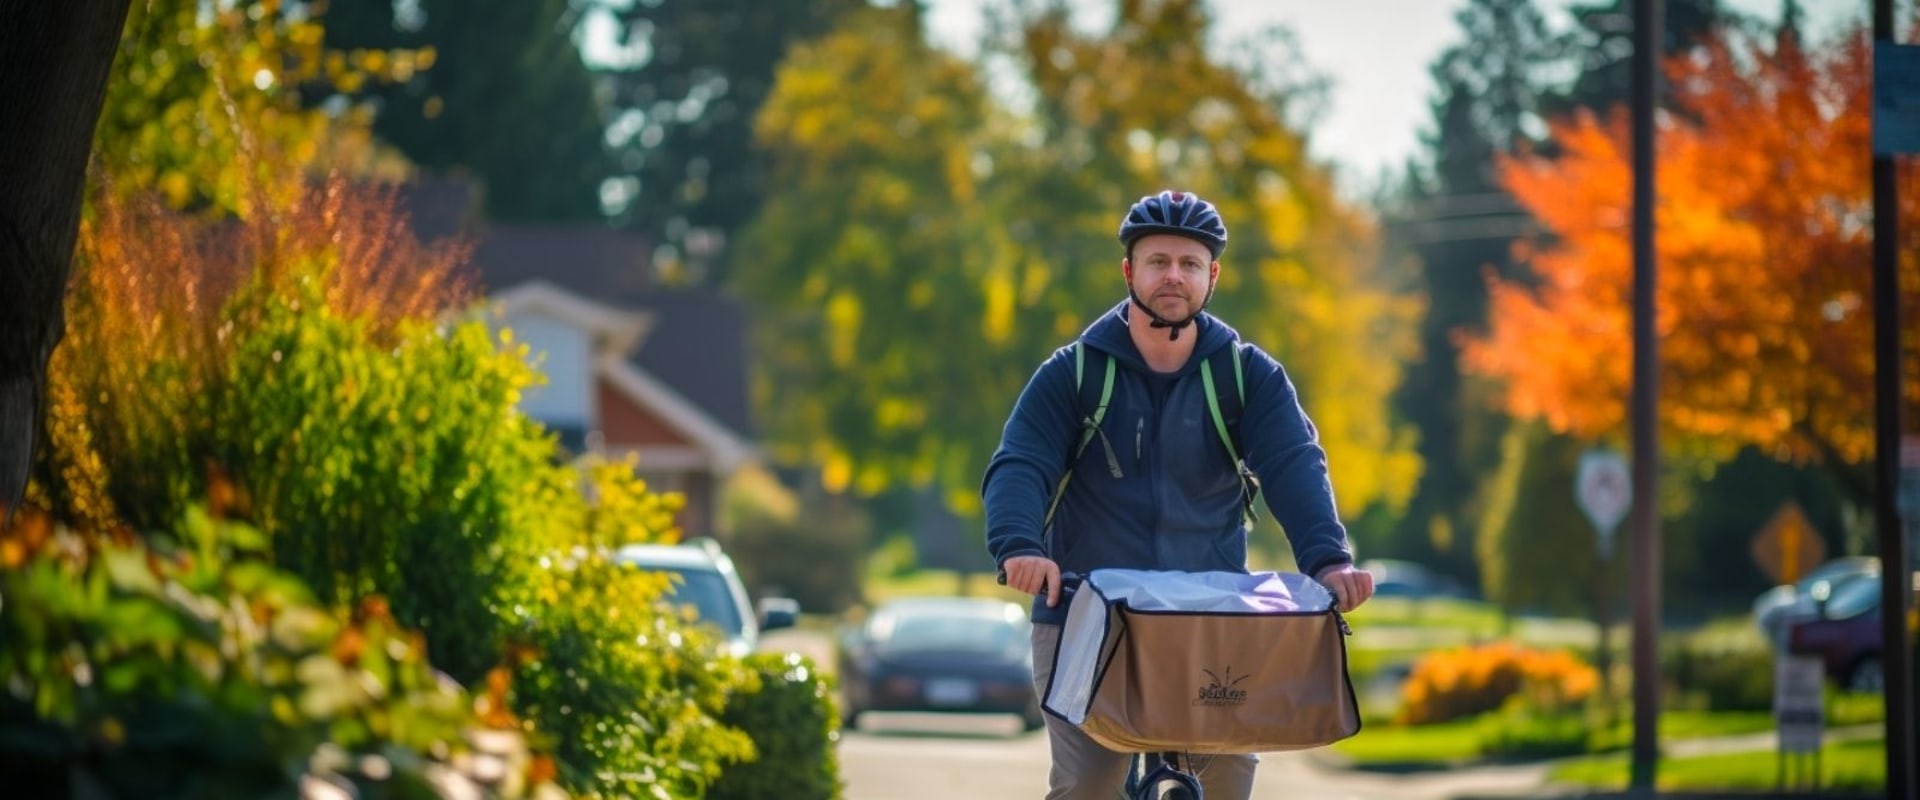 Delivery and Pickup Services: Making Your Life Easier